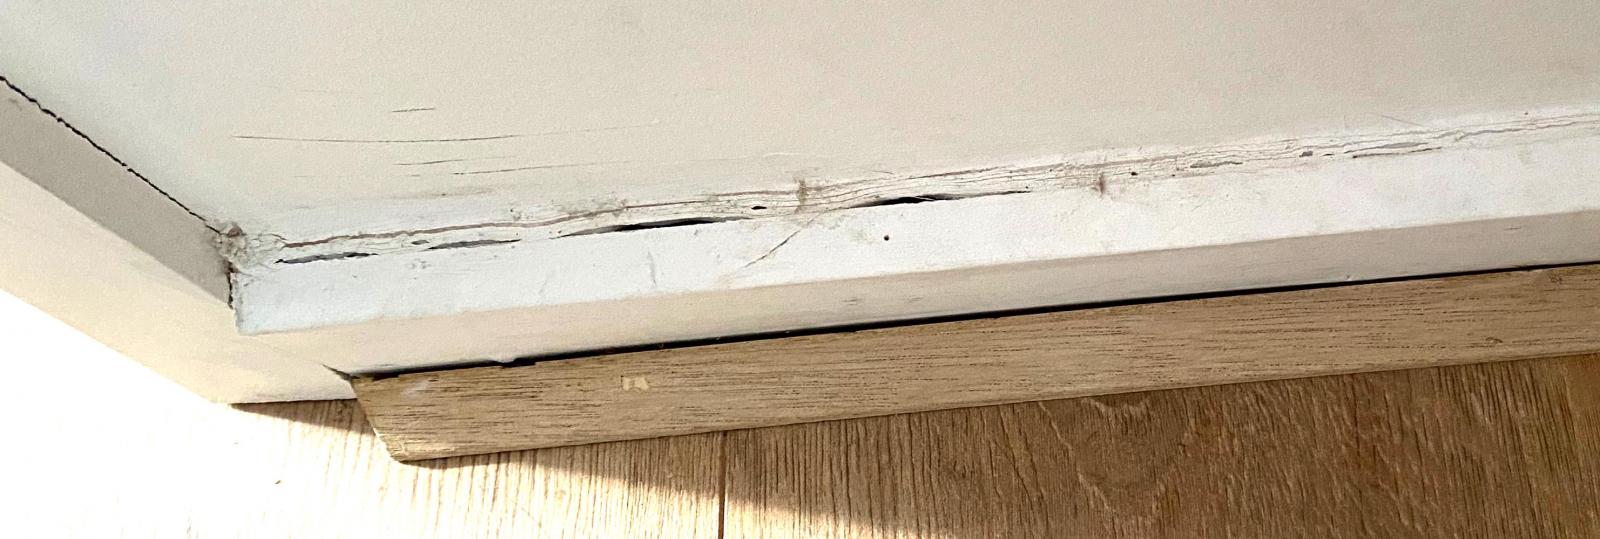 Termite damage to skirting board - YouTube